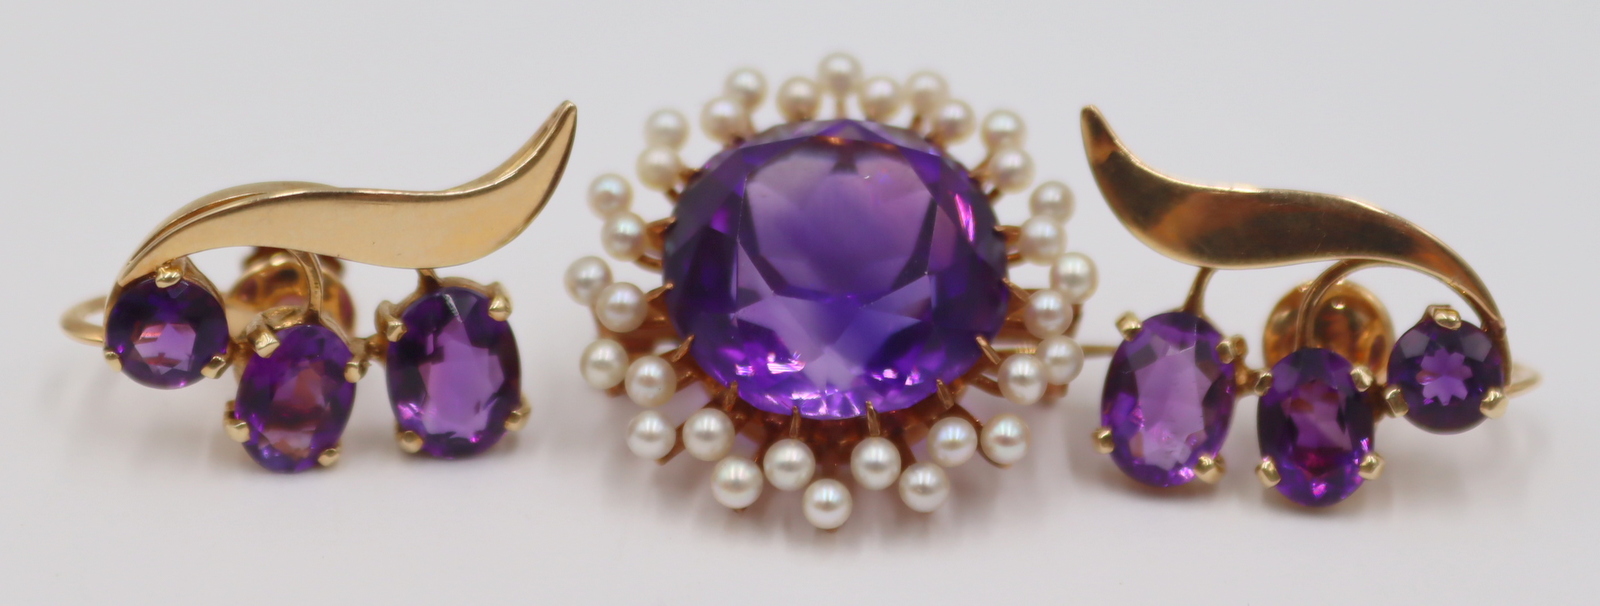 JEWELRY 14KT GOLD AND AMETHYST 3b700b